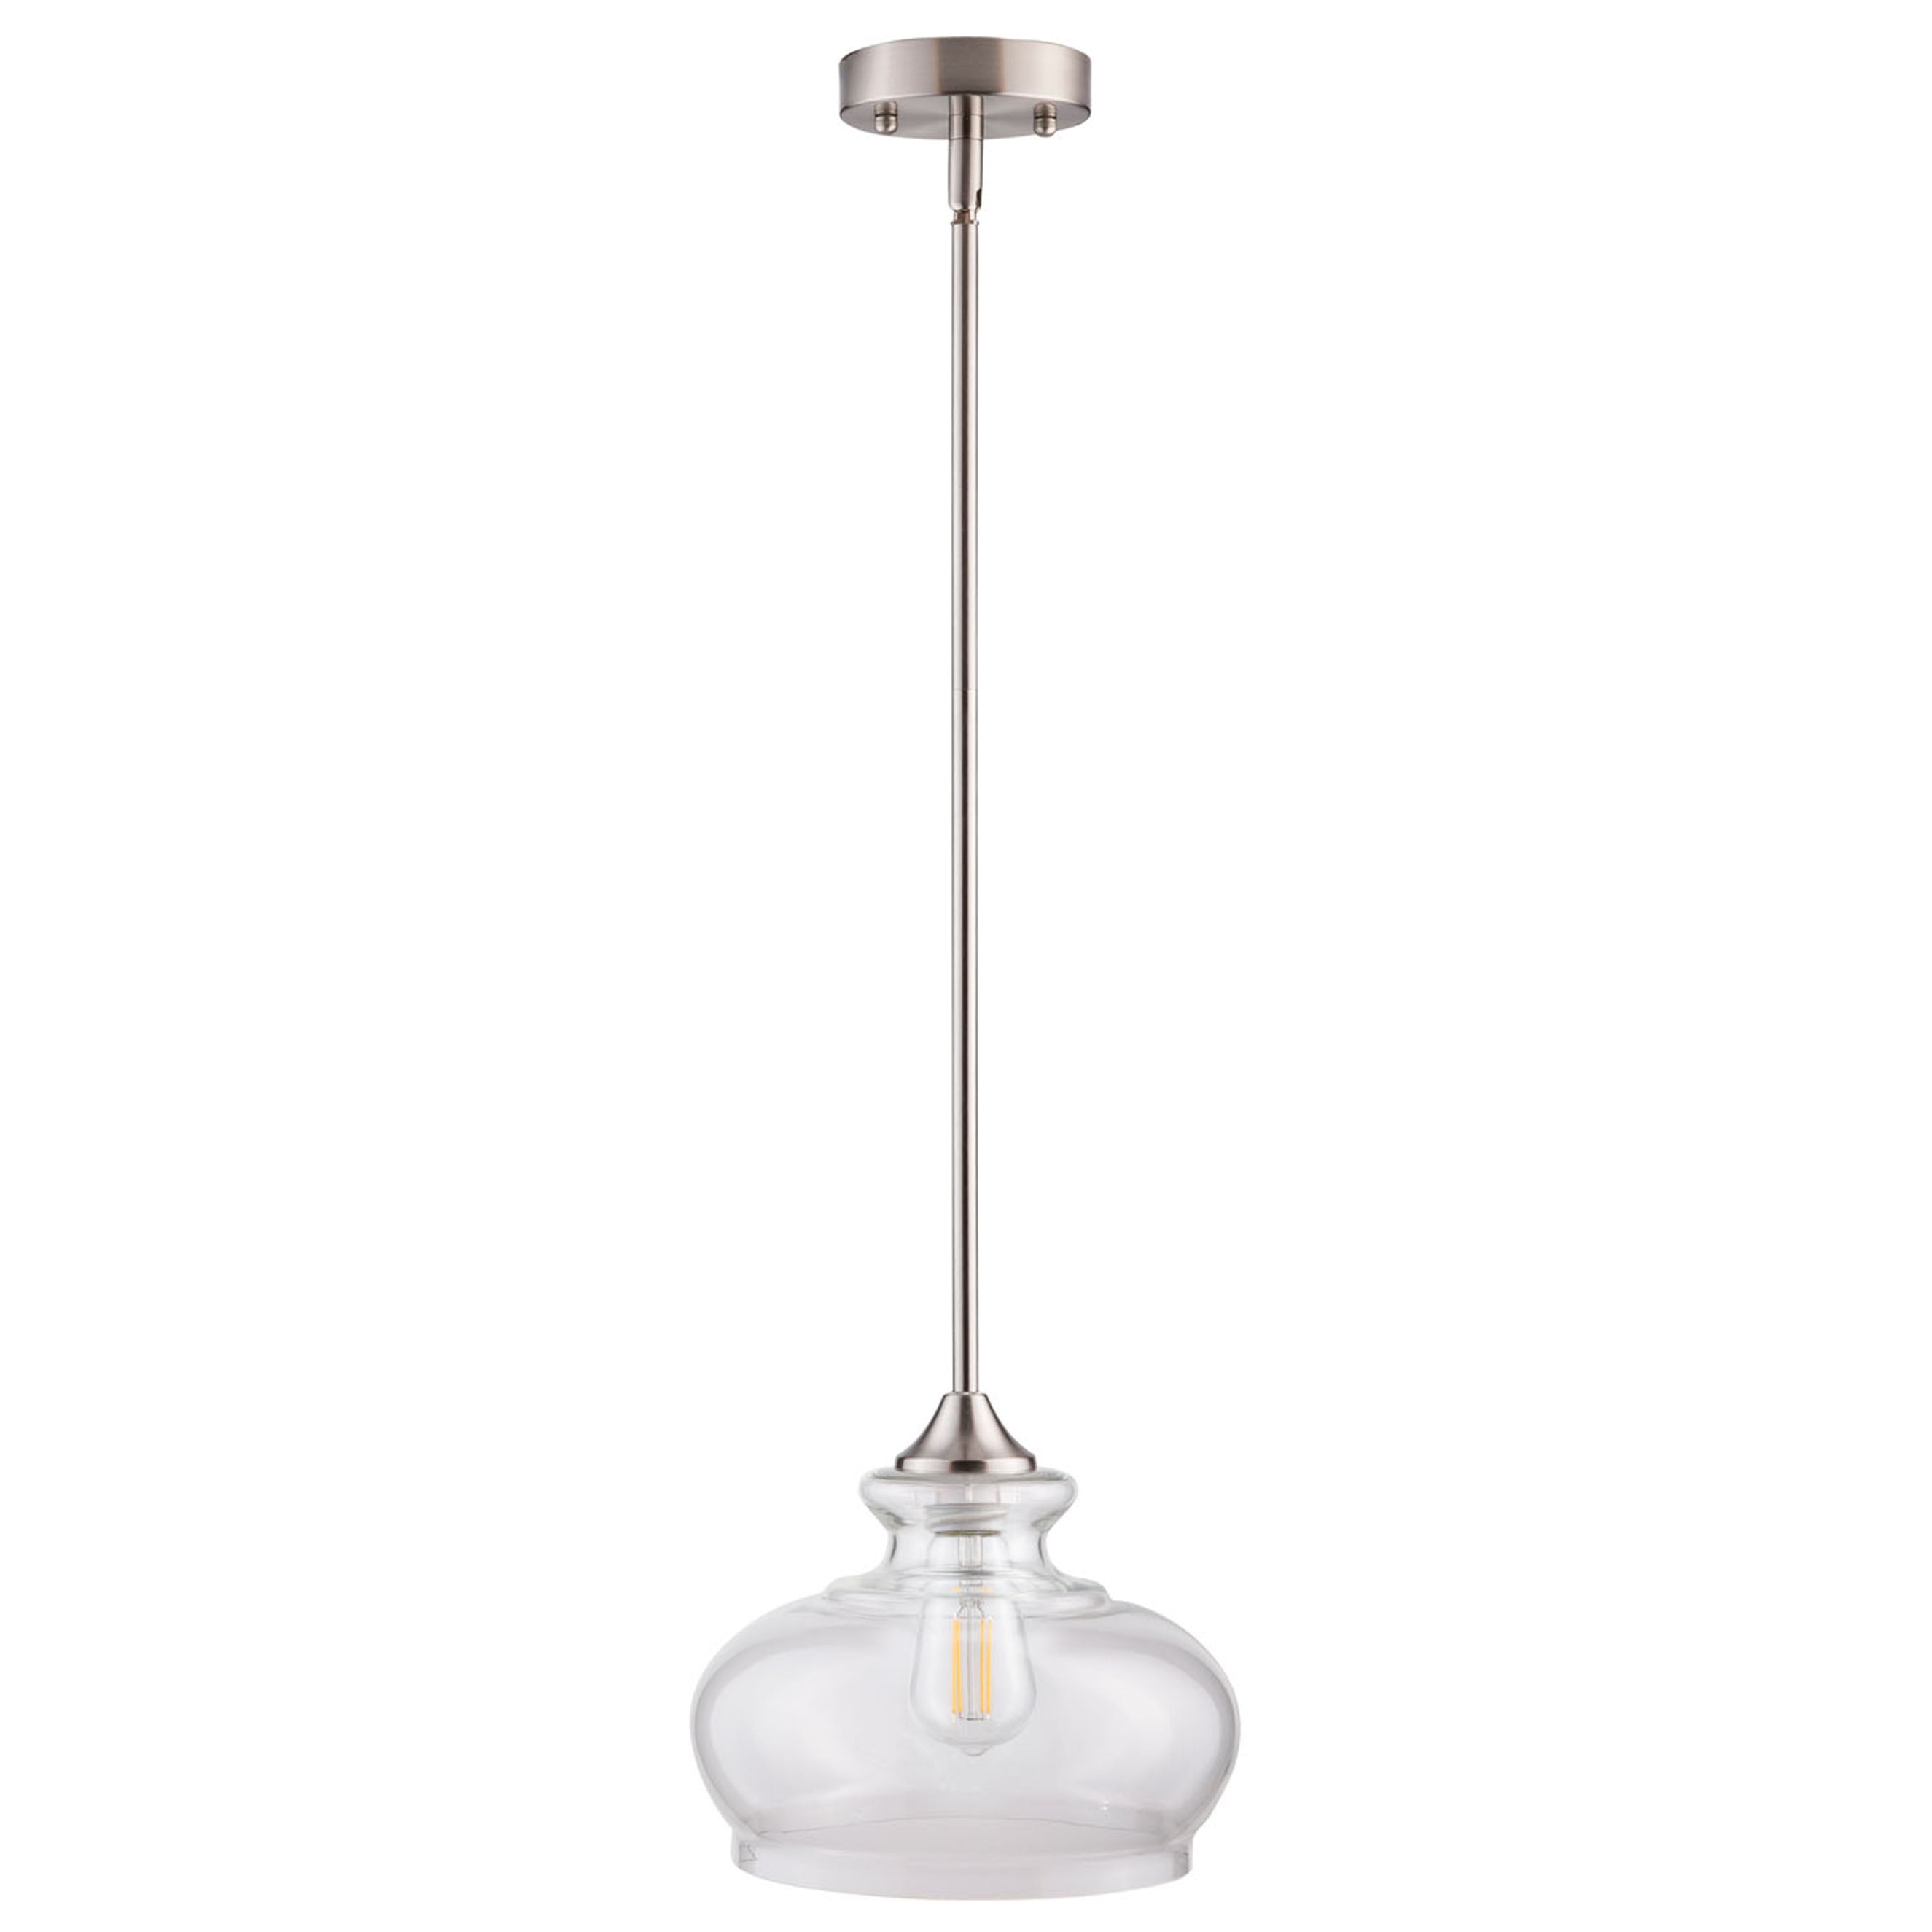 Ovale LED | Modern Light, and Linea Residential bulb Ariella Pendant | Lighting Lighting Affordable included